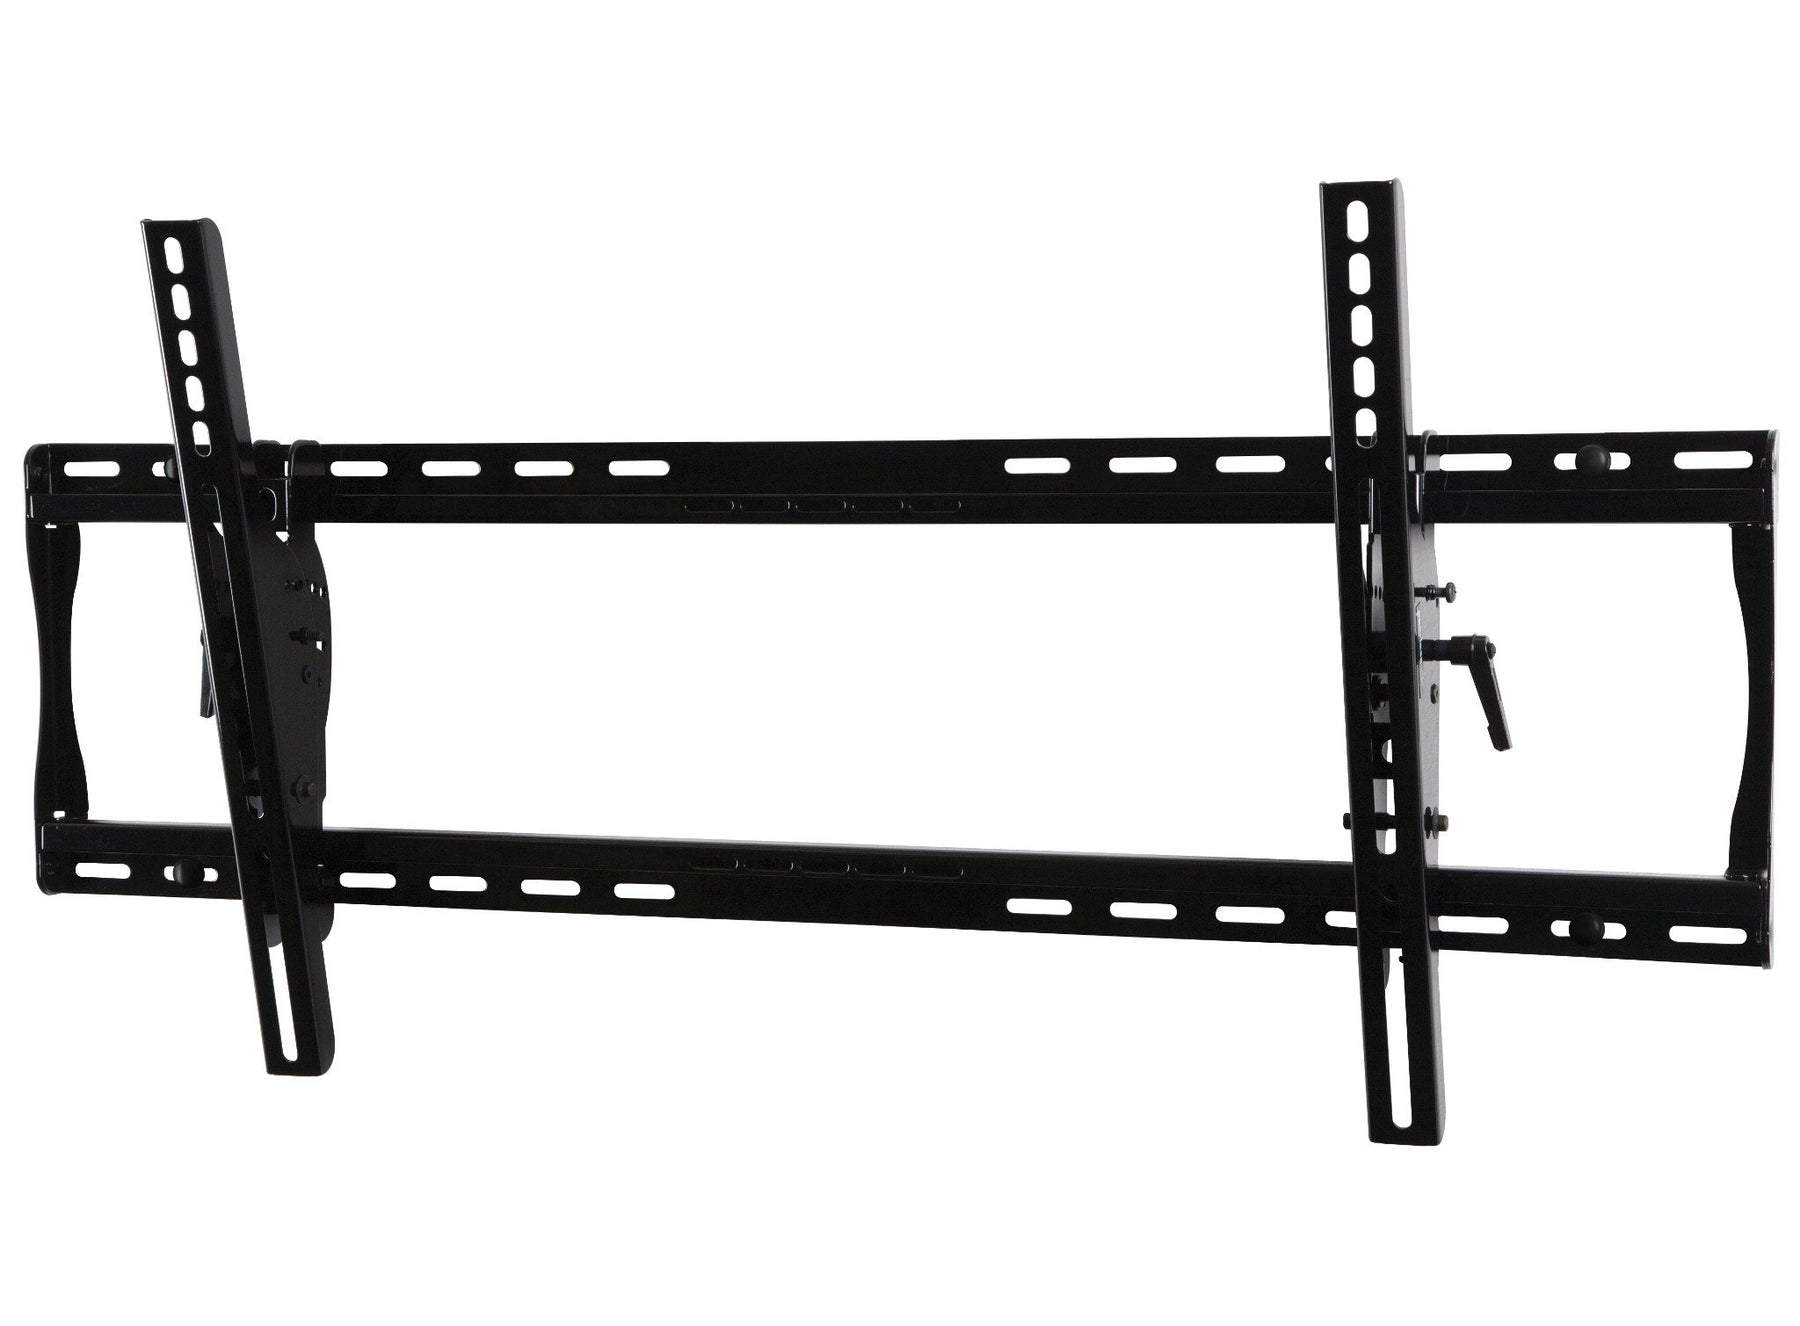 Peerless PARAMOUNT Universal Tilt Wall Mount PT660 - Mounting Kit (Wall Plate, Swing Bracket) - For Flat Panel - Cold Rolled Steel - Gloss Black - Screen Size: 39"-90"